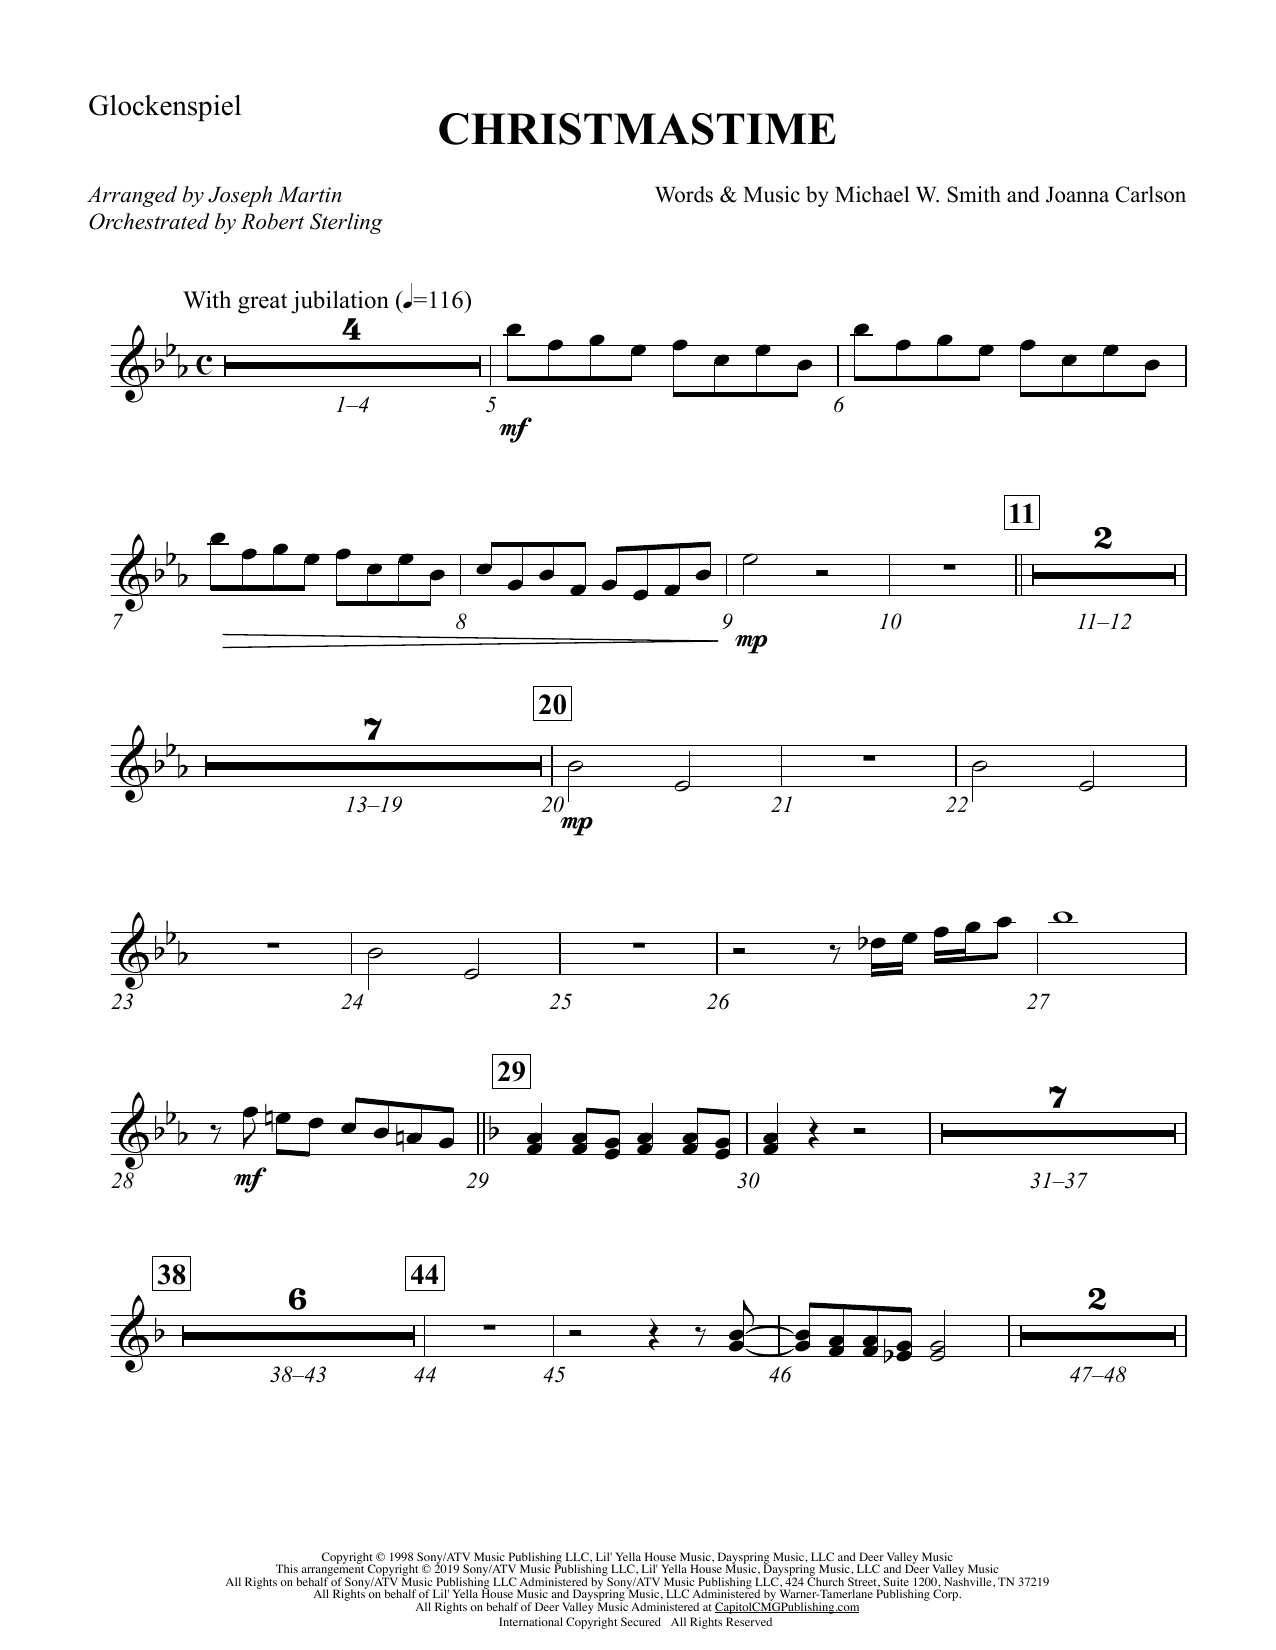 Michael W. Smith & Joanna Carlson Christmastime (arr. Joseph M. Martin) - Glockenspiel sheet music preview music notes and score for Choir Instrumental Pak including 2 page(s)